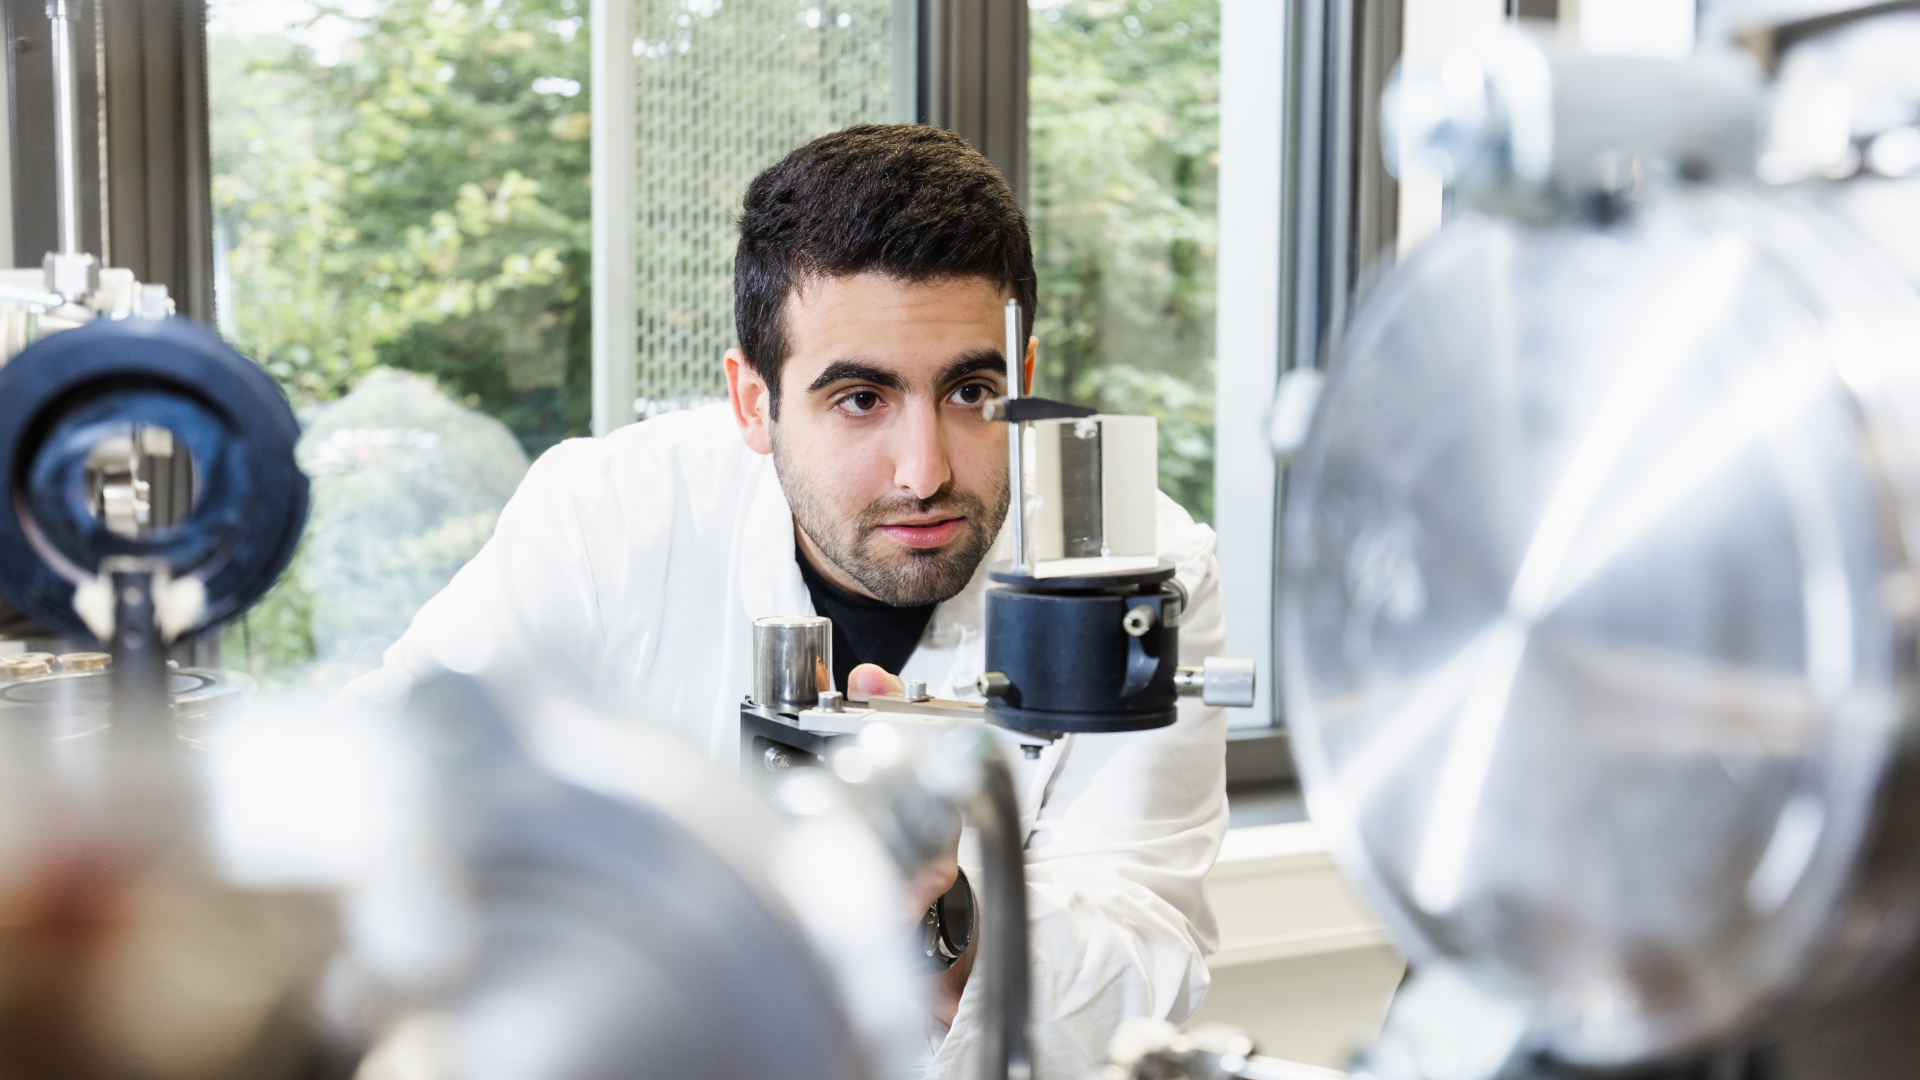 Abbas El Moussawi looks through an apparatus for laser diagnostics in his lab.